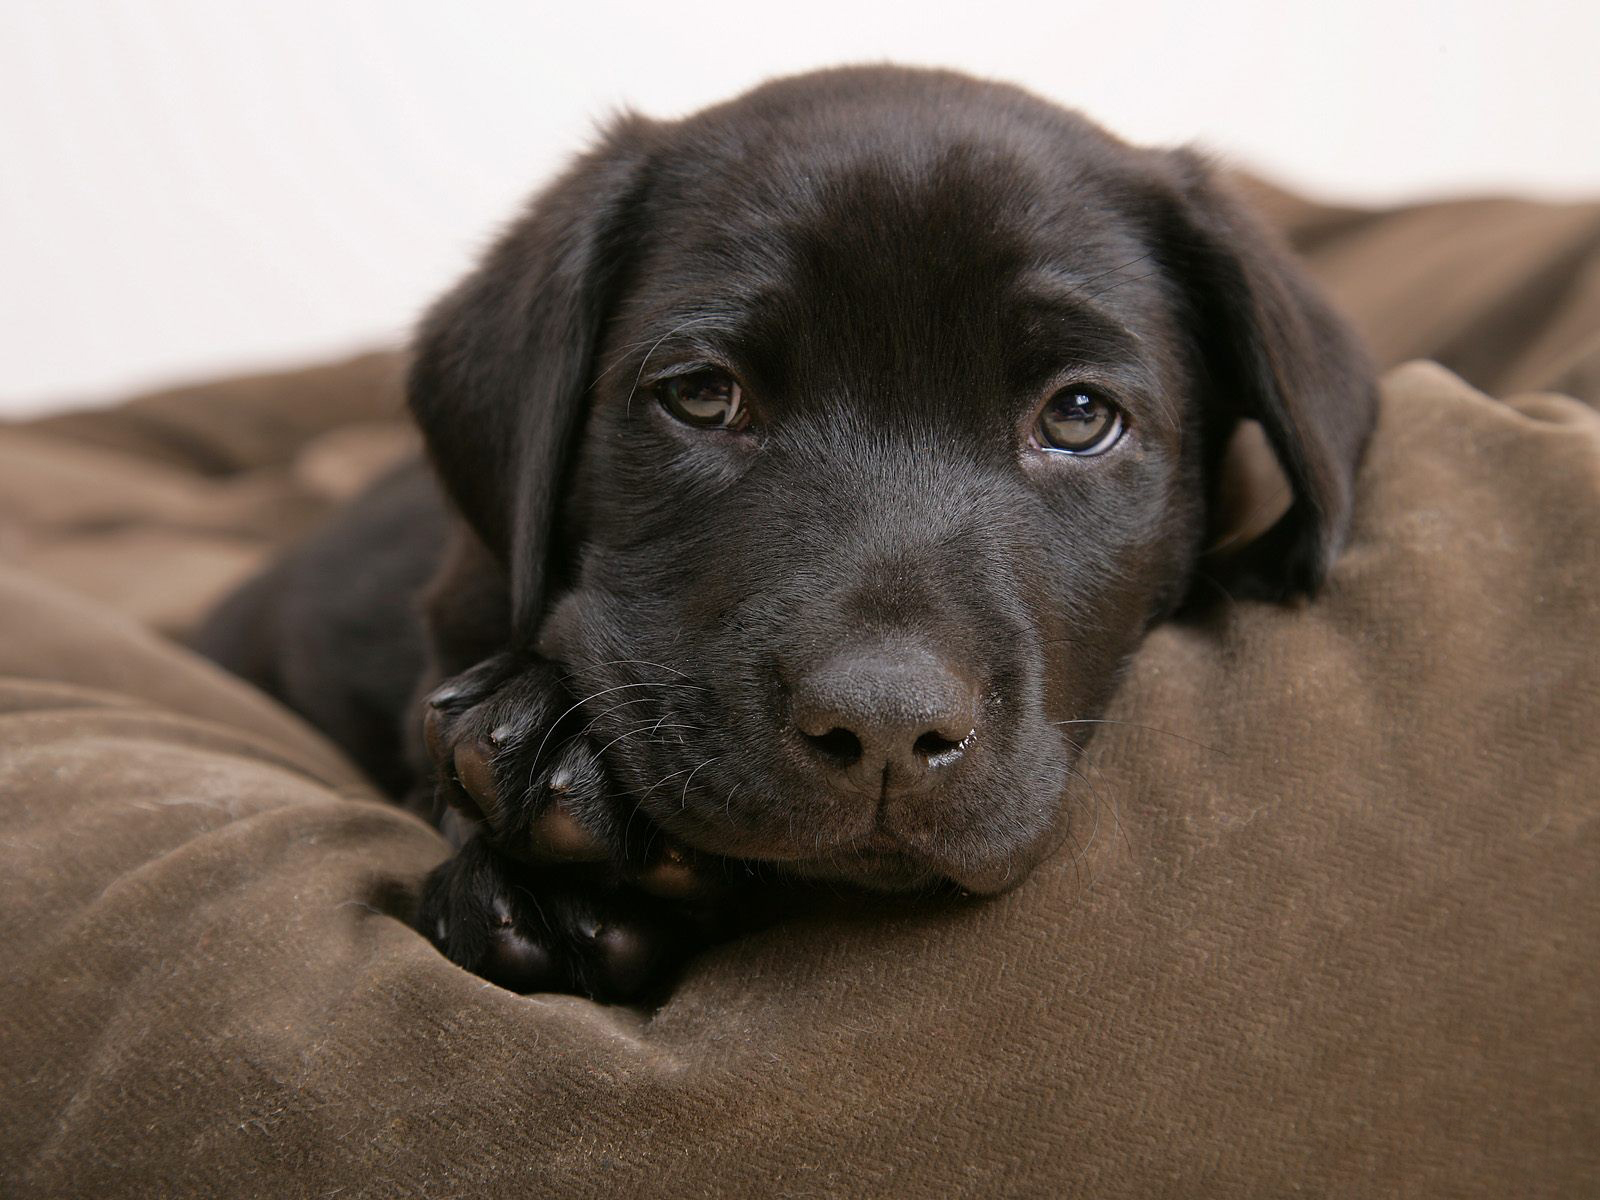 Chocolate Labrador puppy with adorable expression.